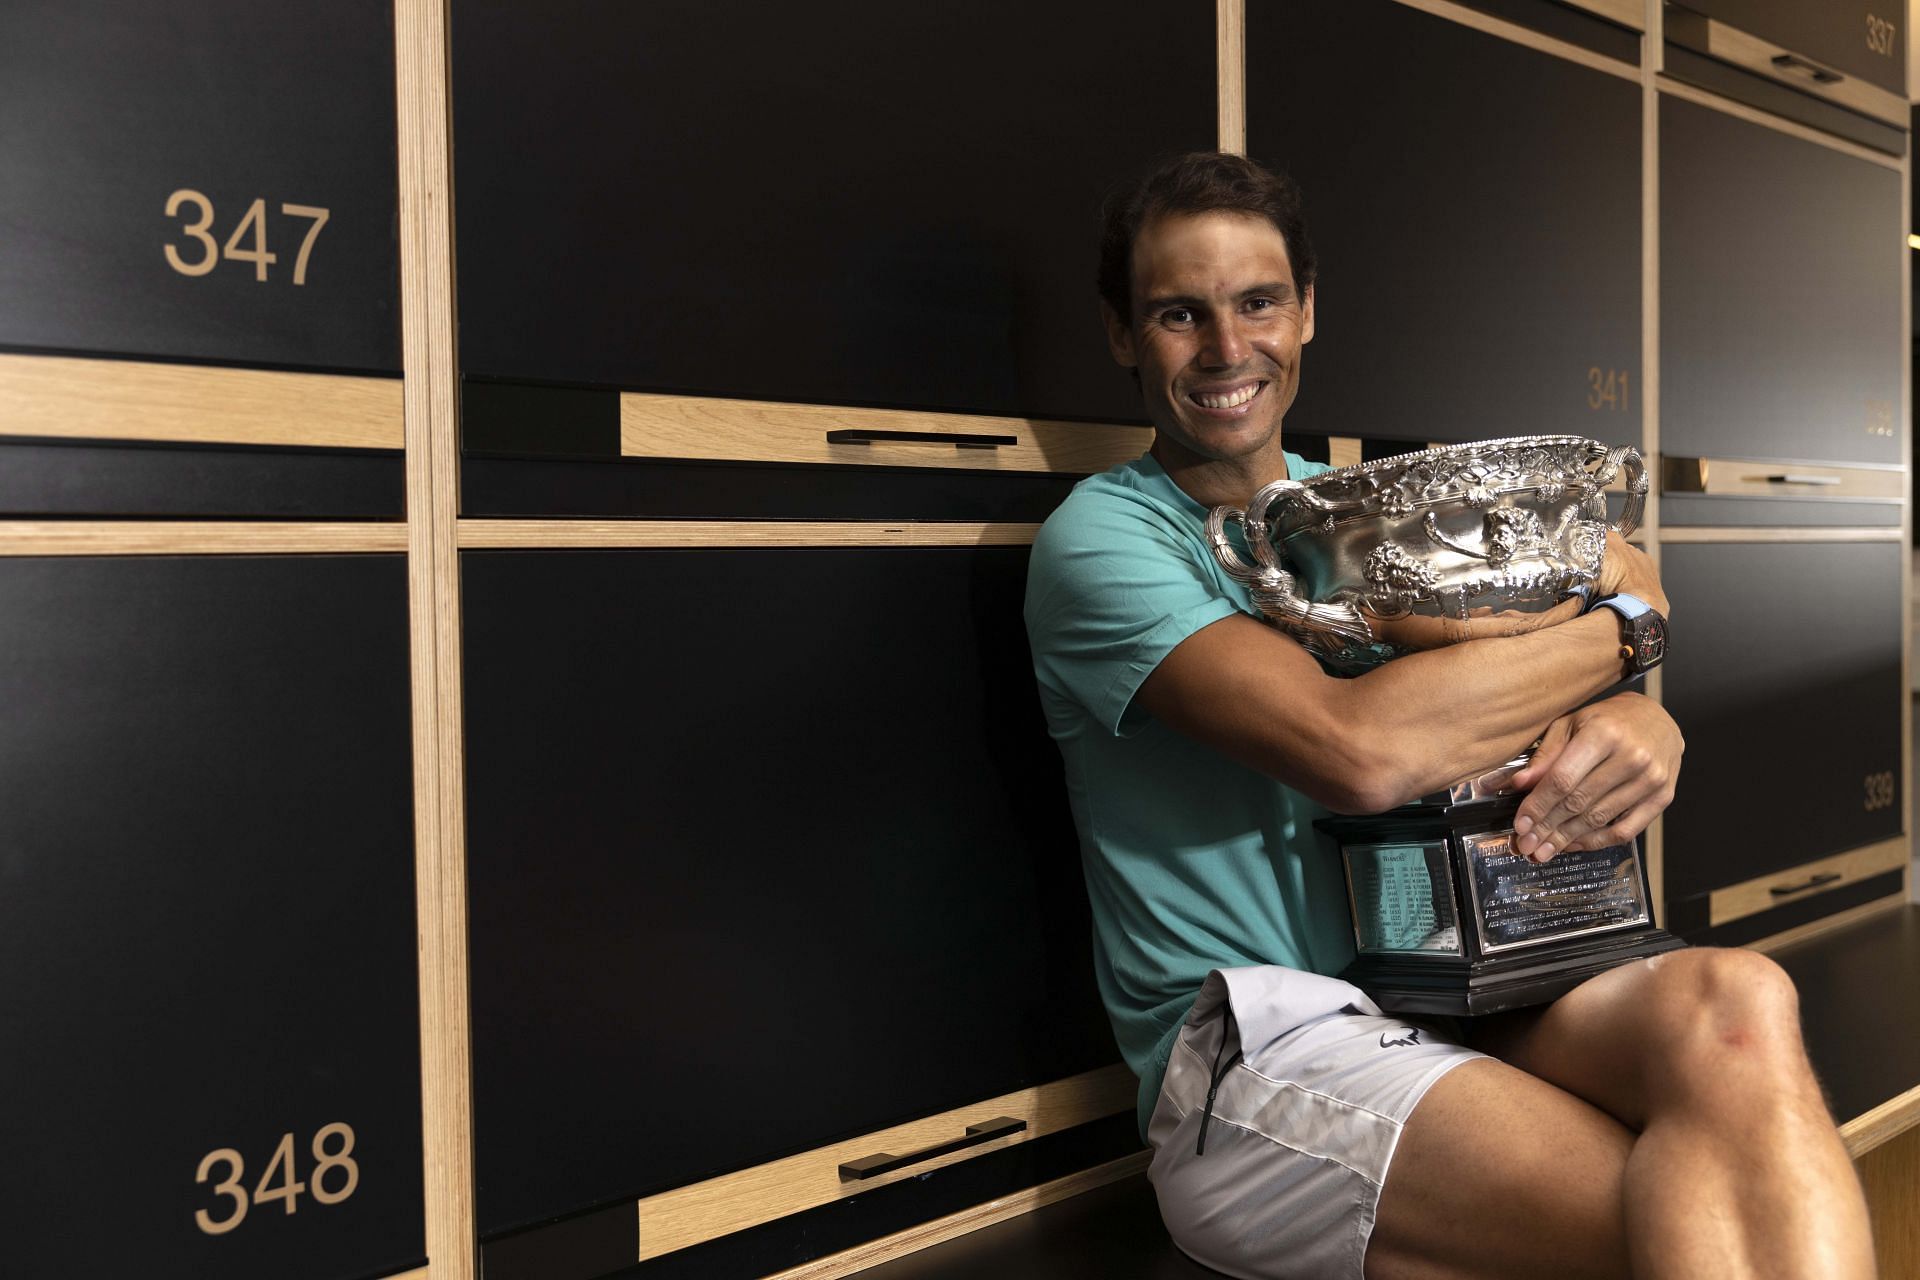 Rafael Nadal said that the Australian Open win is the most unexpected achievement of his career